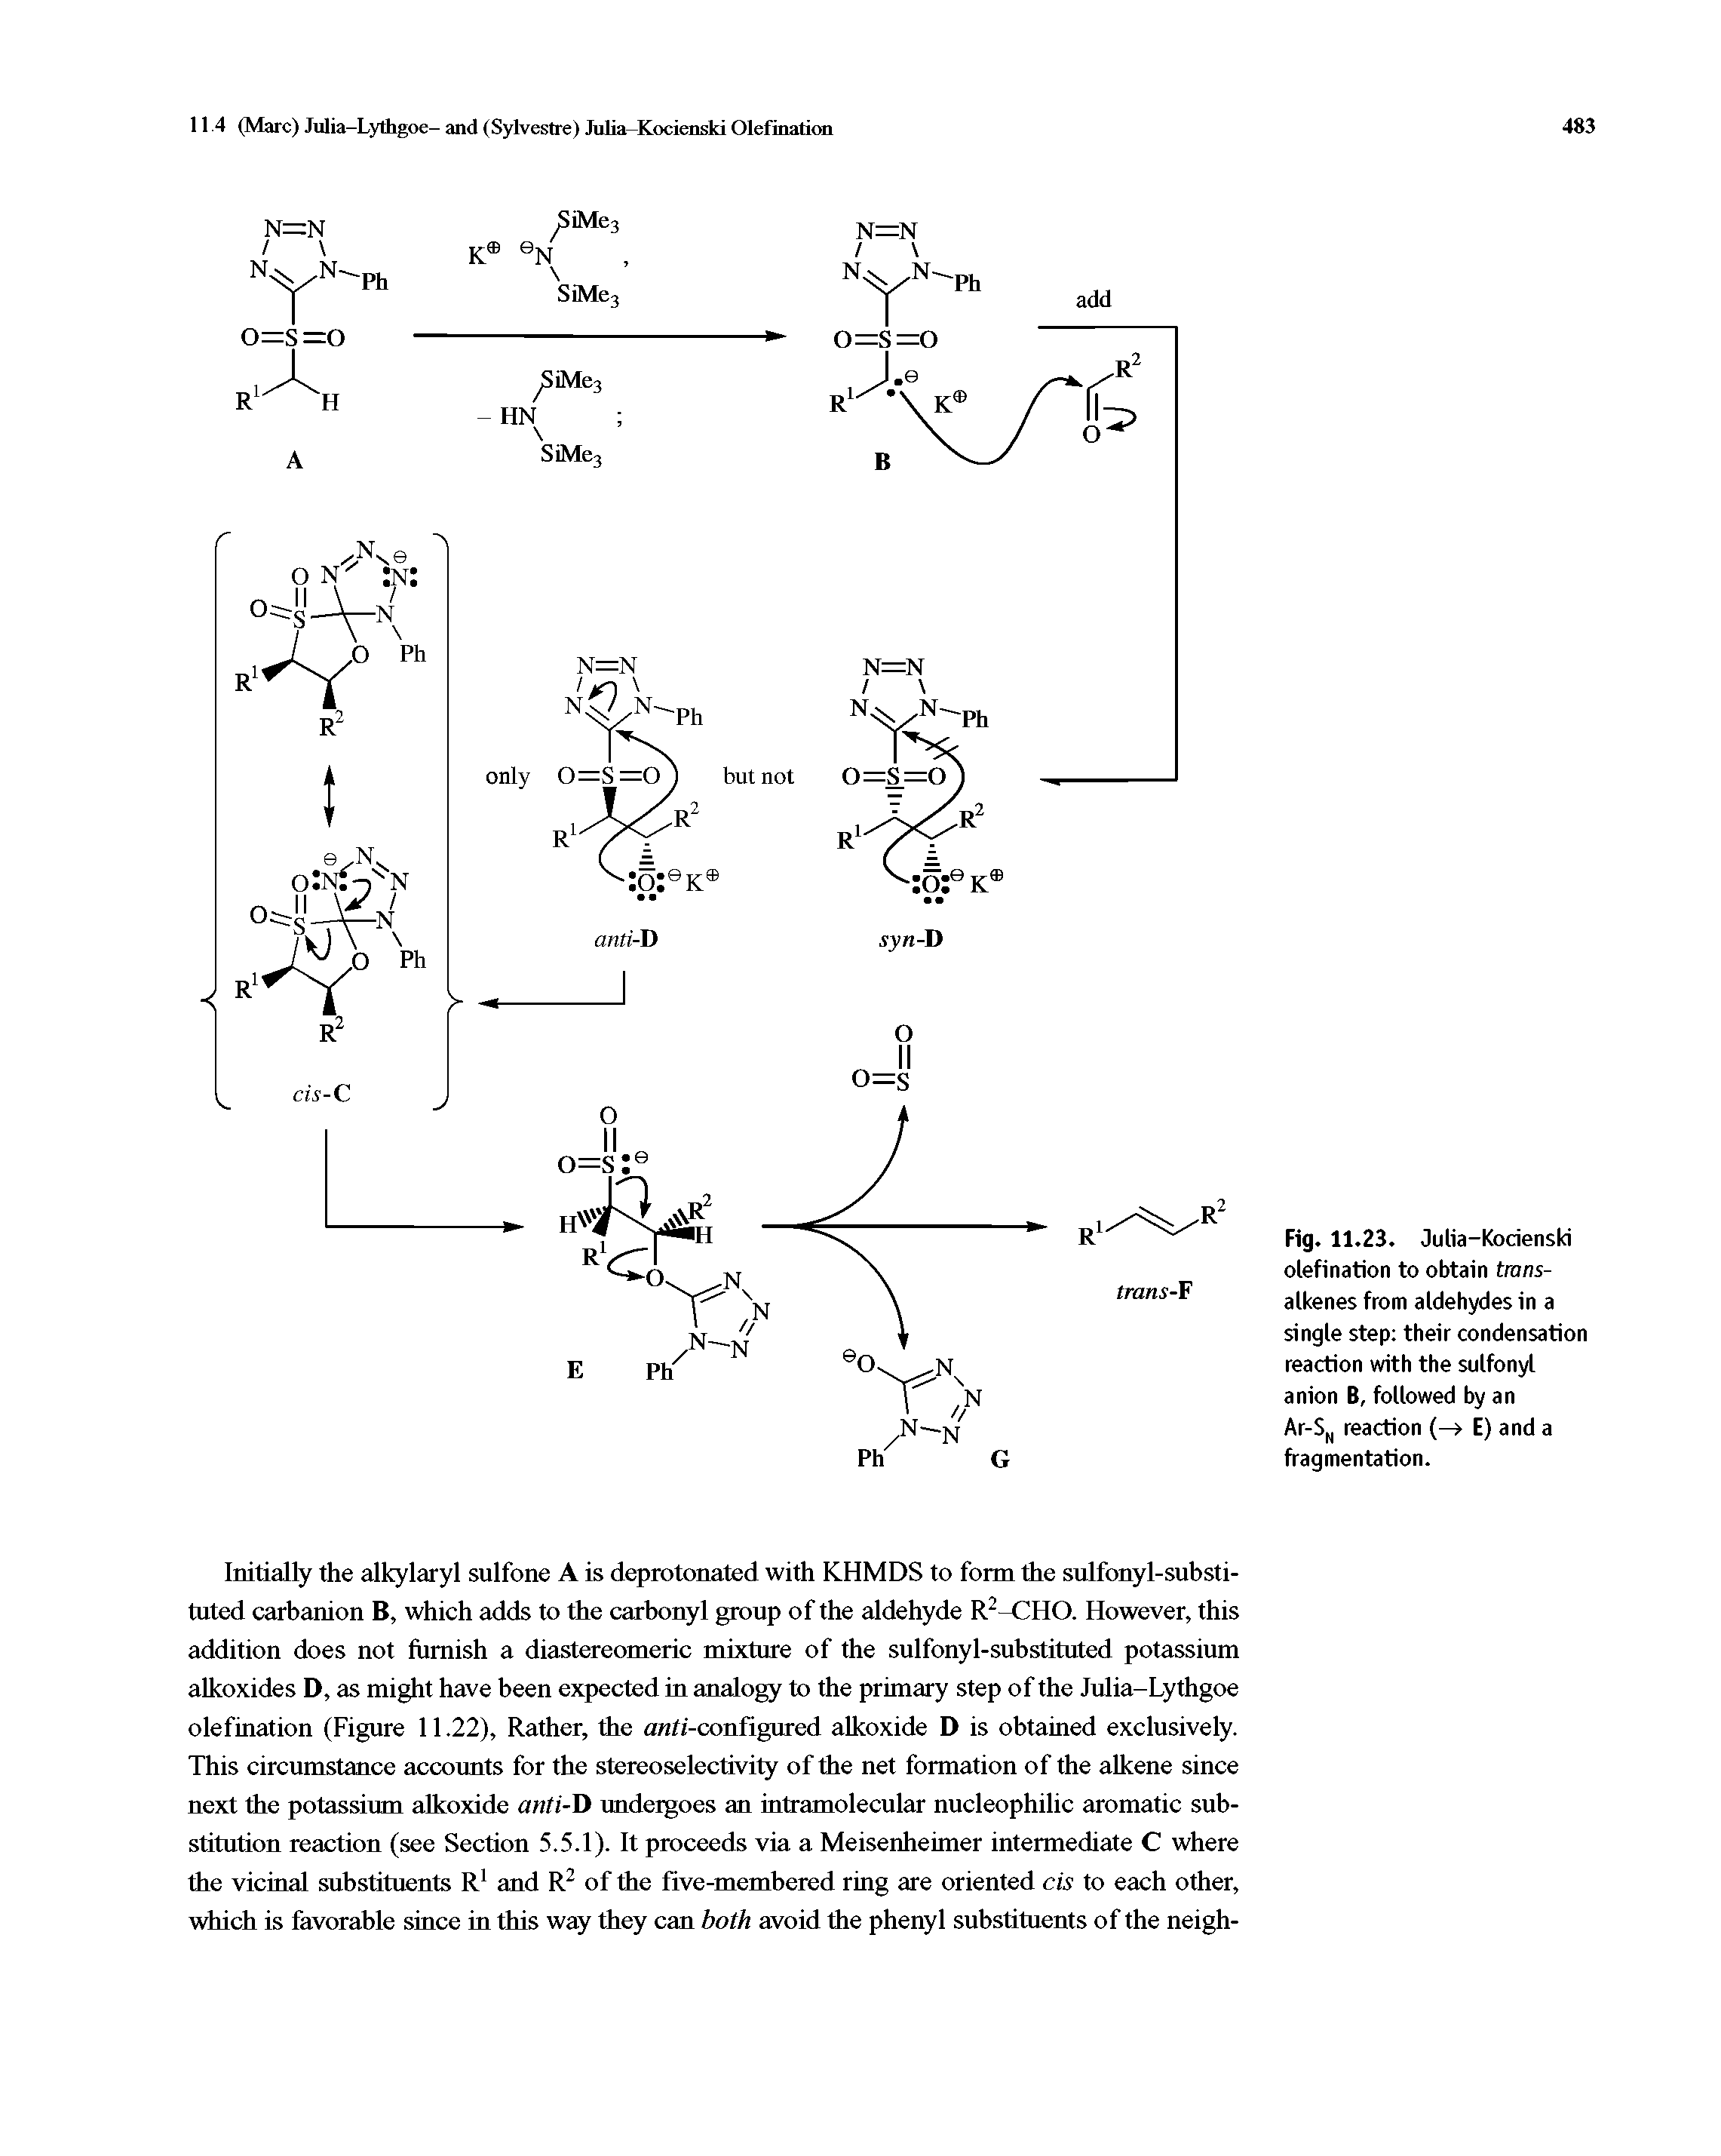 Fig. 11.23. Julia-Kocienski olefination to obtain tmns-alkenes from aldehydes in a single step their condensation reaction with the sulfonyl anion B, followed by an Ar-SN reaction (- E) and a fragmentation.